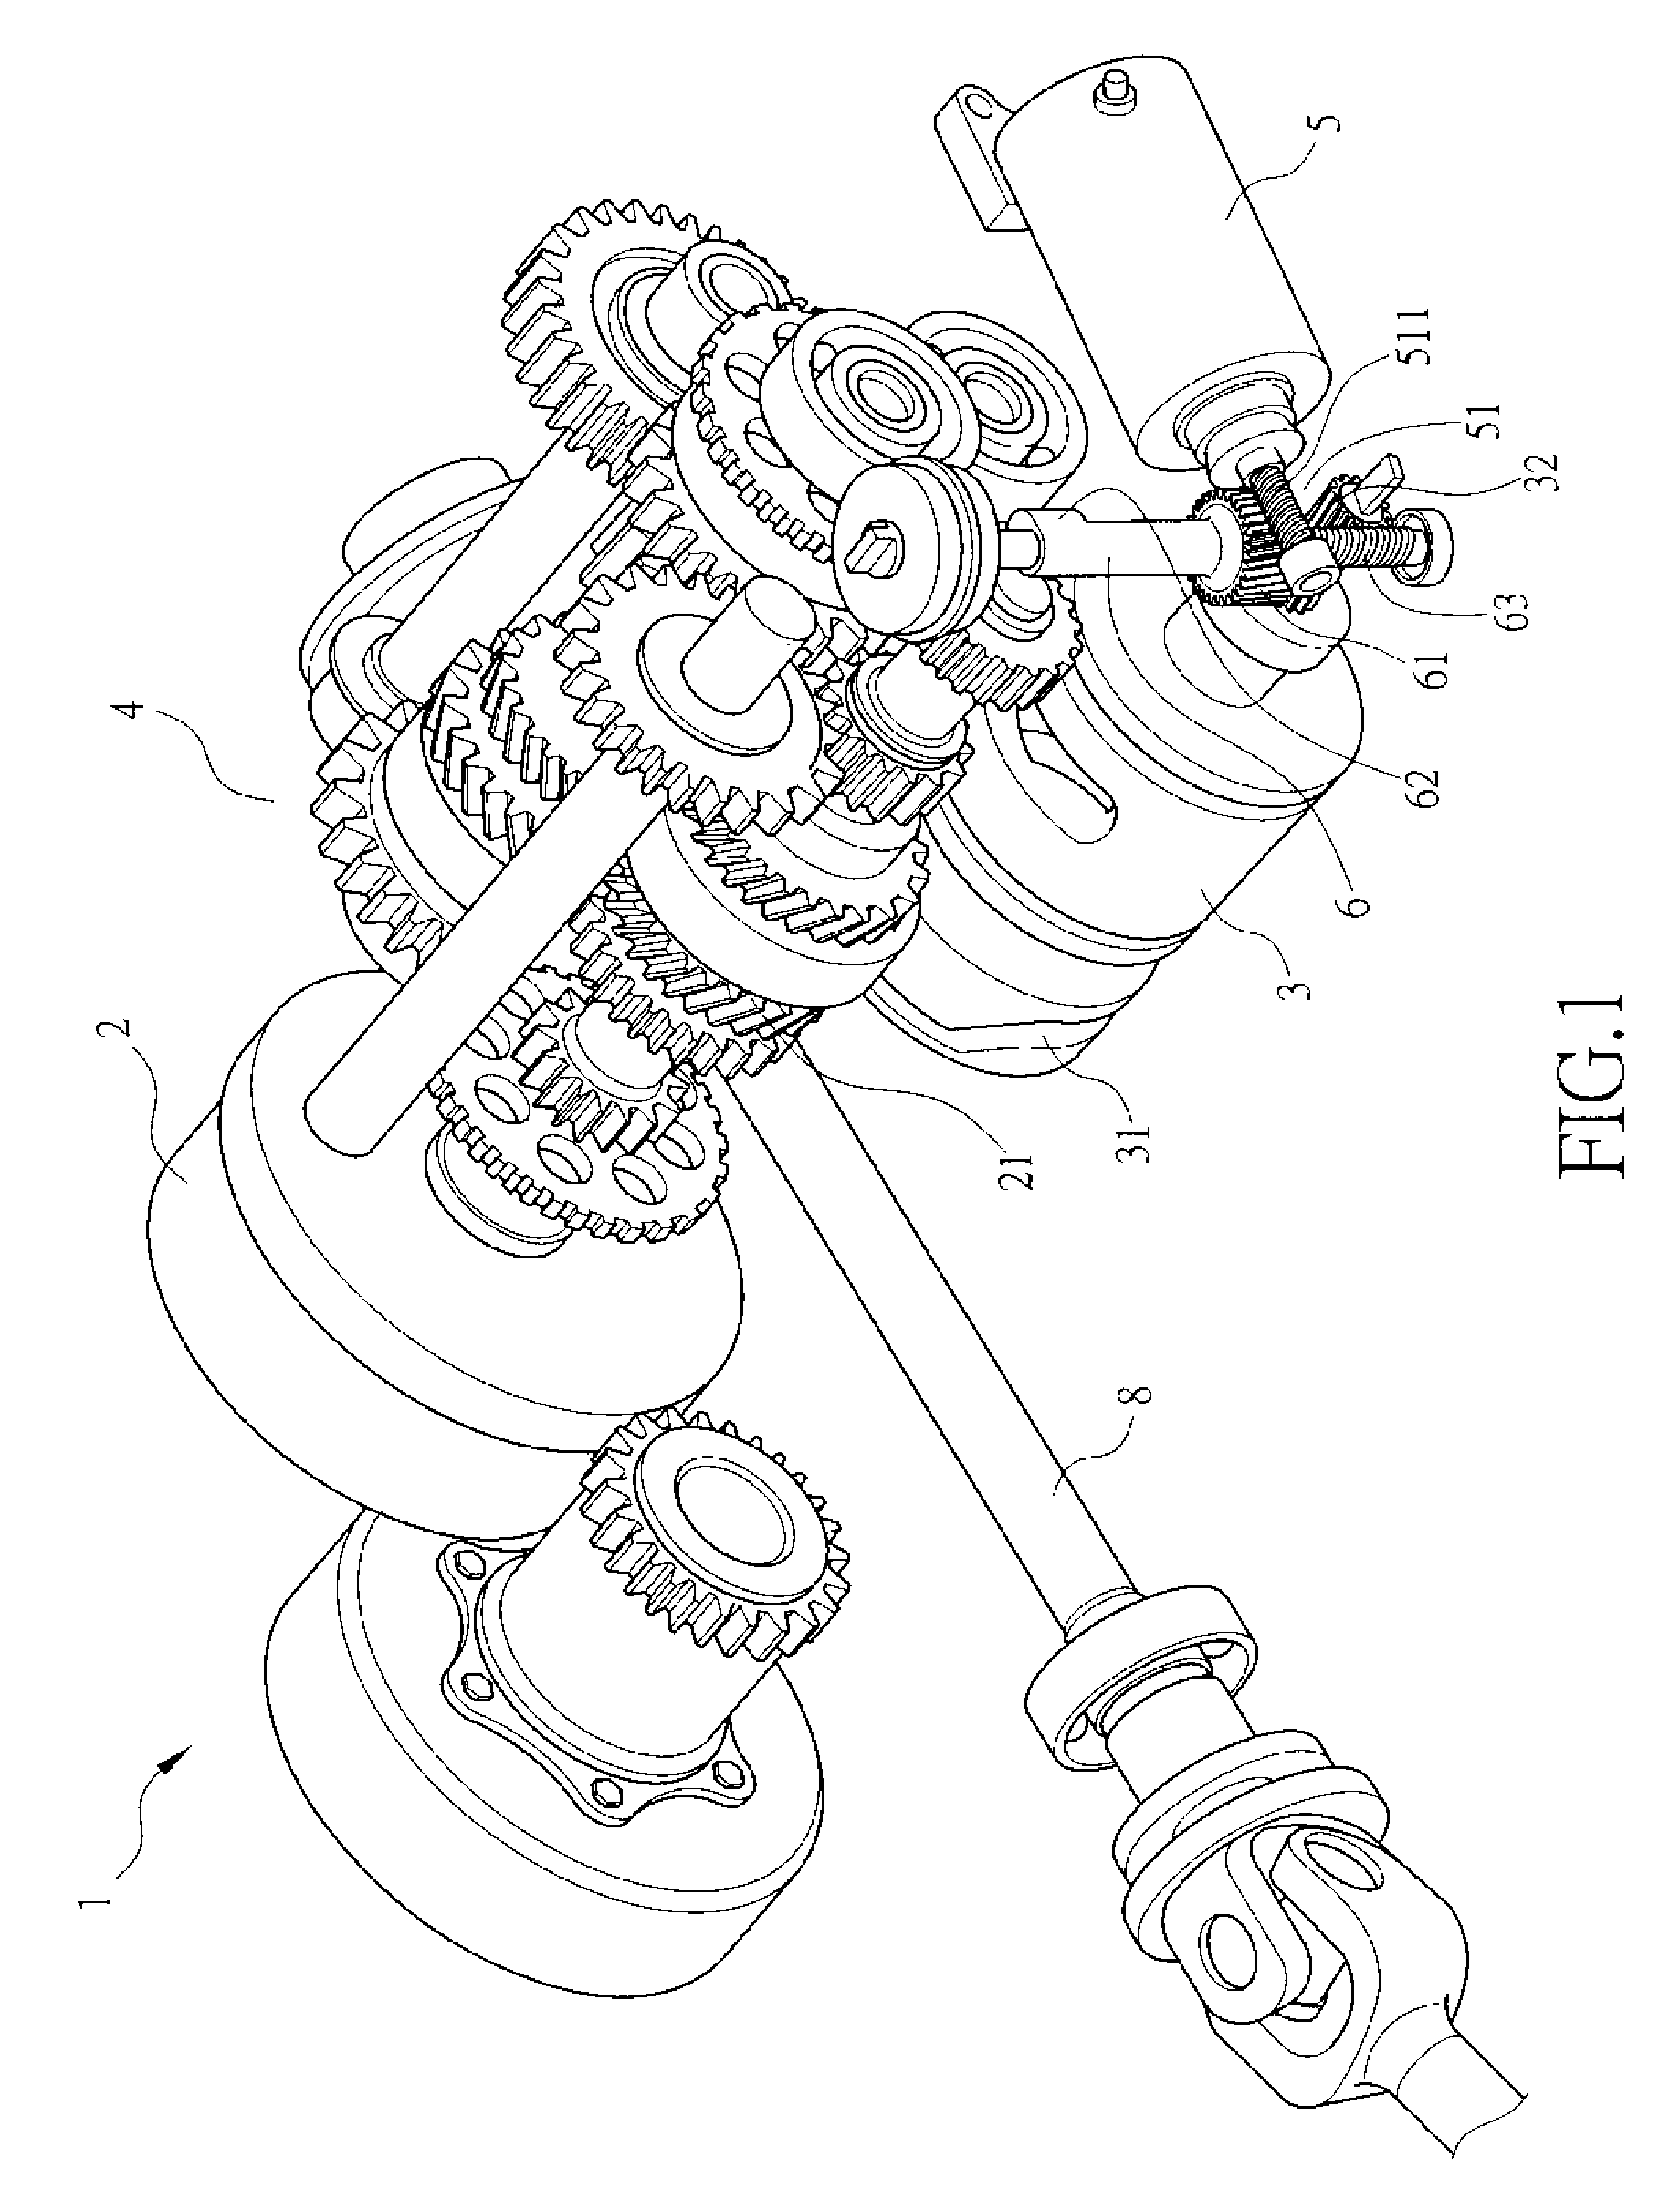 Gear-shifting structure for vehicle